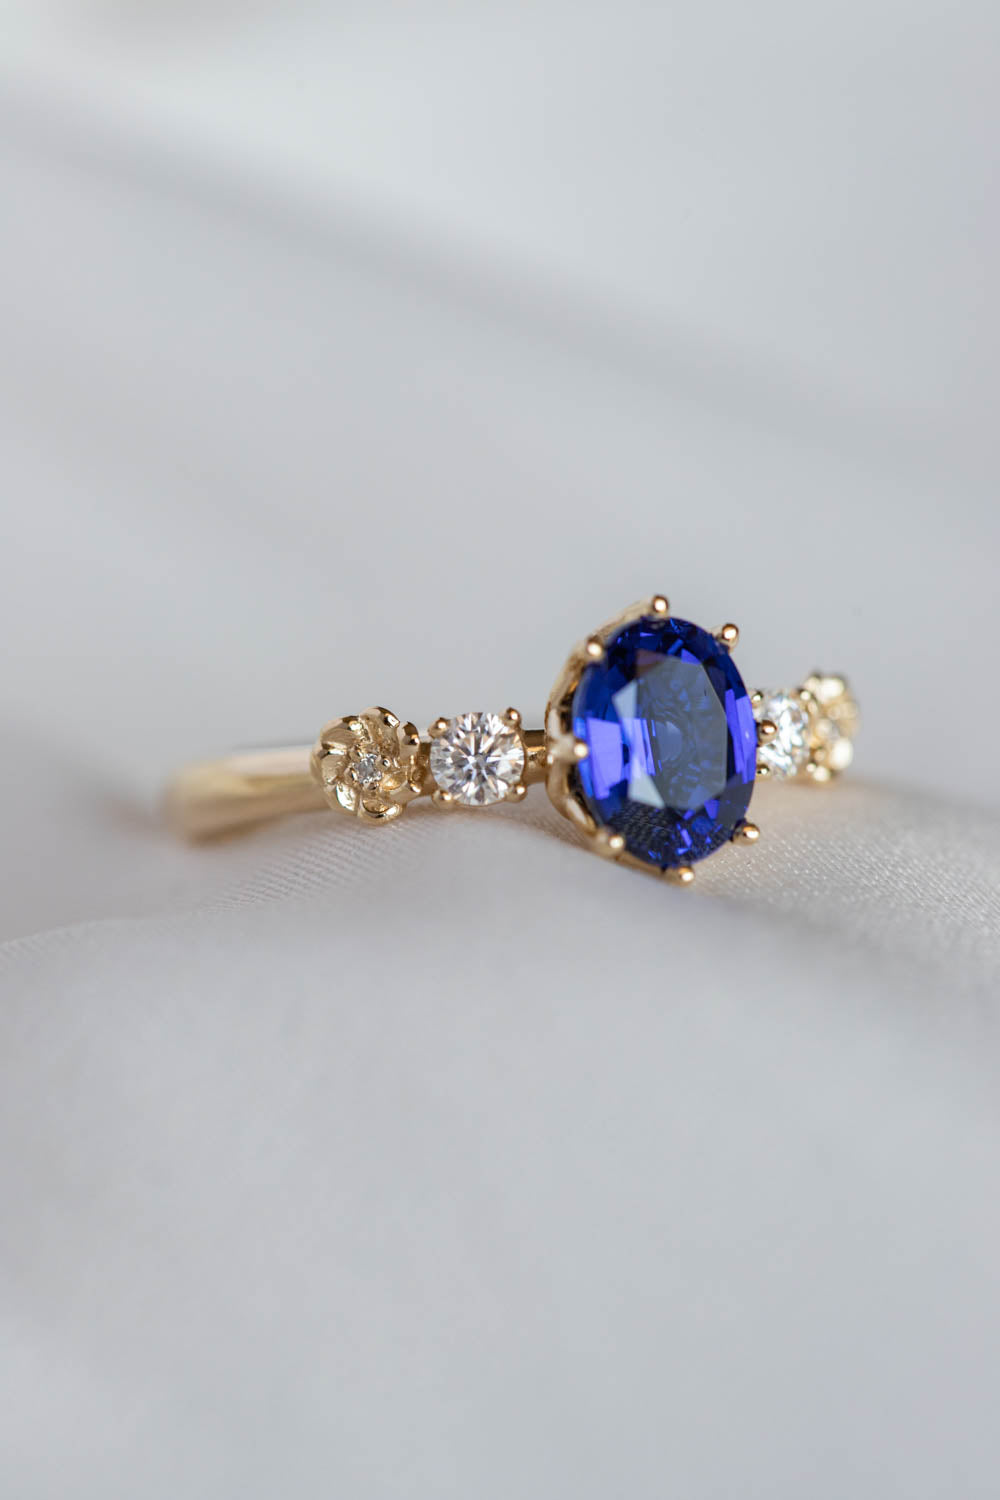 Royal blue sapphire engagement ring, flower promise ring with lab sapphire and diamonds / Fiorella - Eden Garden Jewelry™